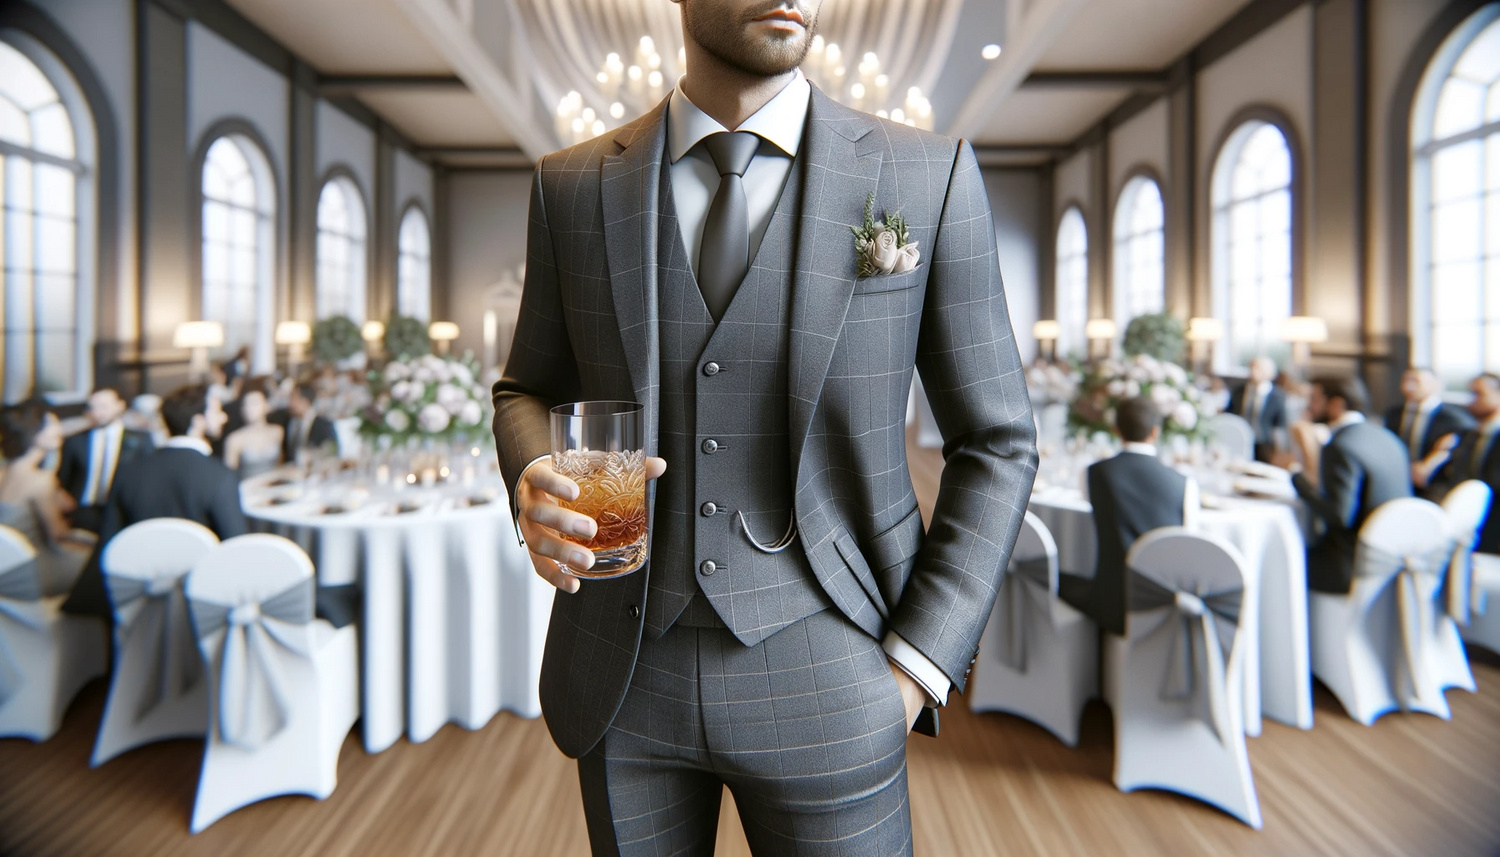 Wedding Etiquette: What Color Suit to Wear to a Wedding?